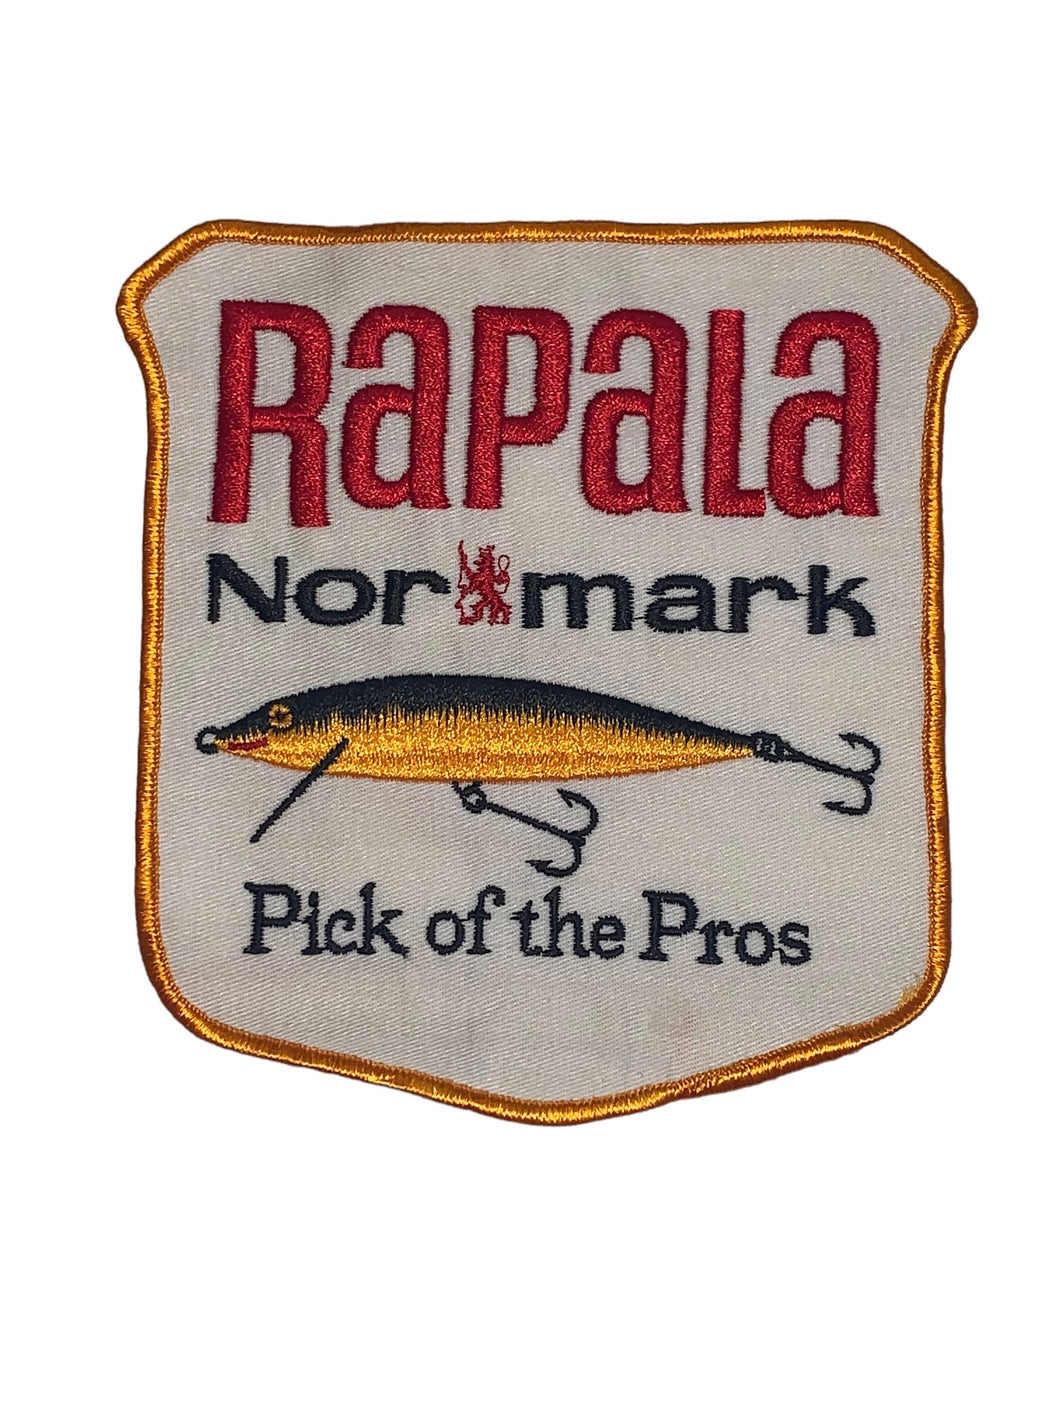 Rare RAPALA NOR MARK PICK OF THE PROS Vintage Patch Crest • LARGE SIZE